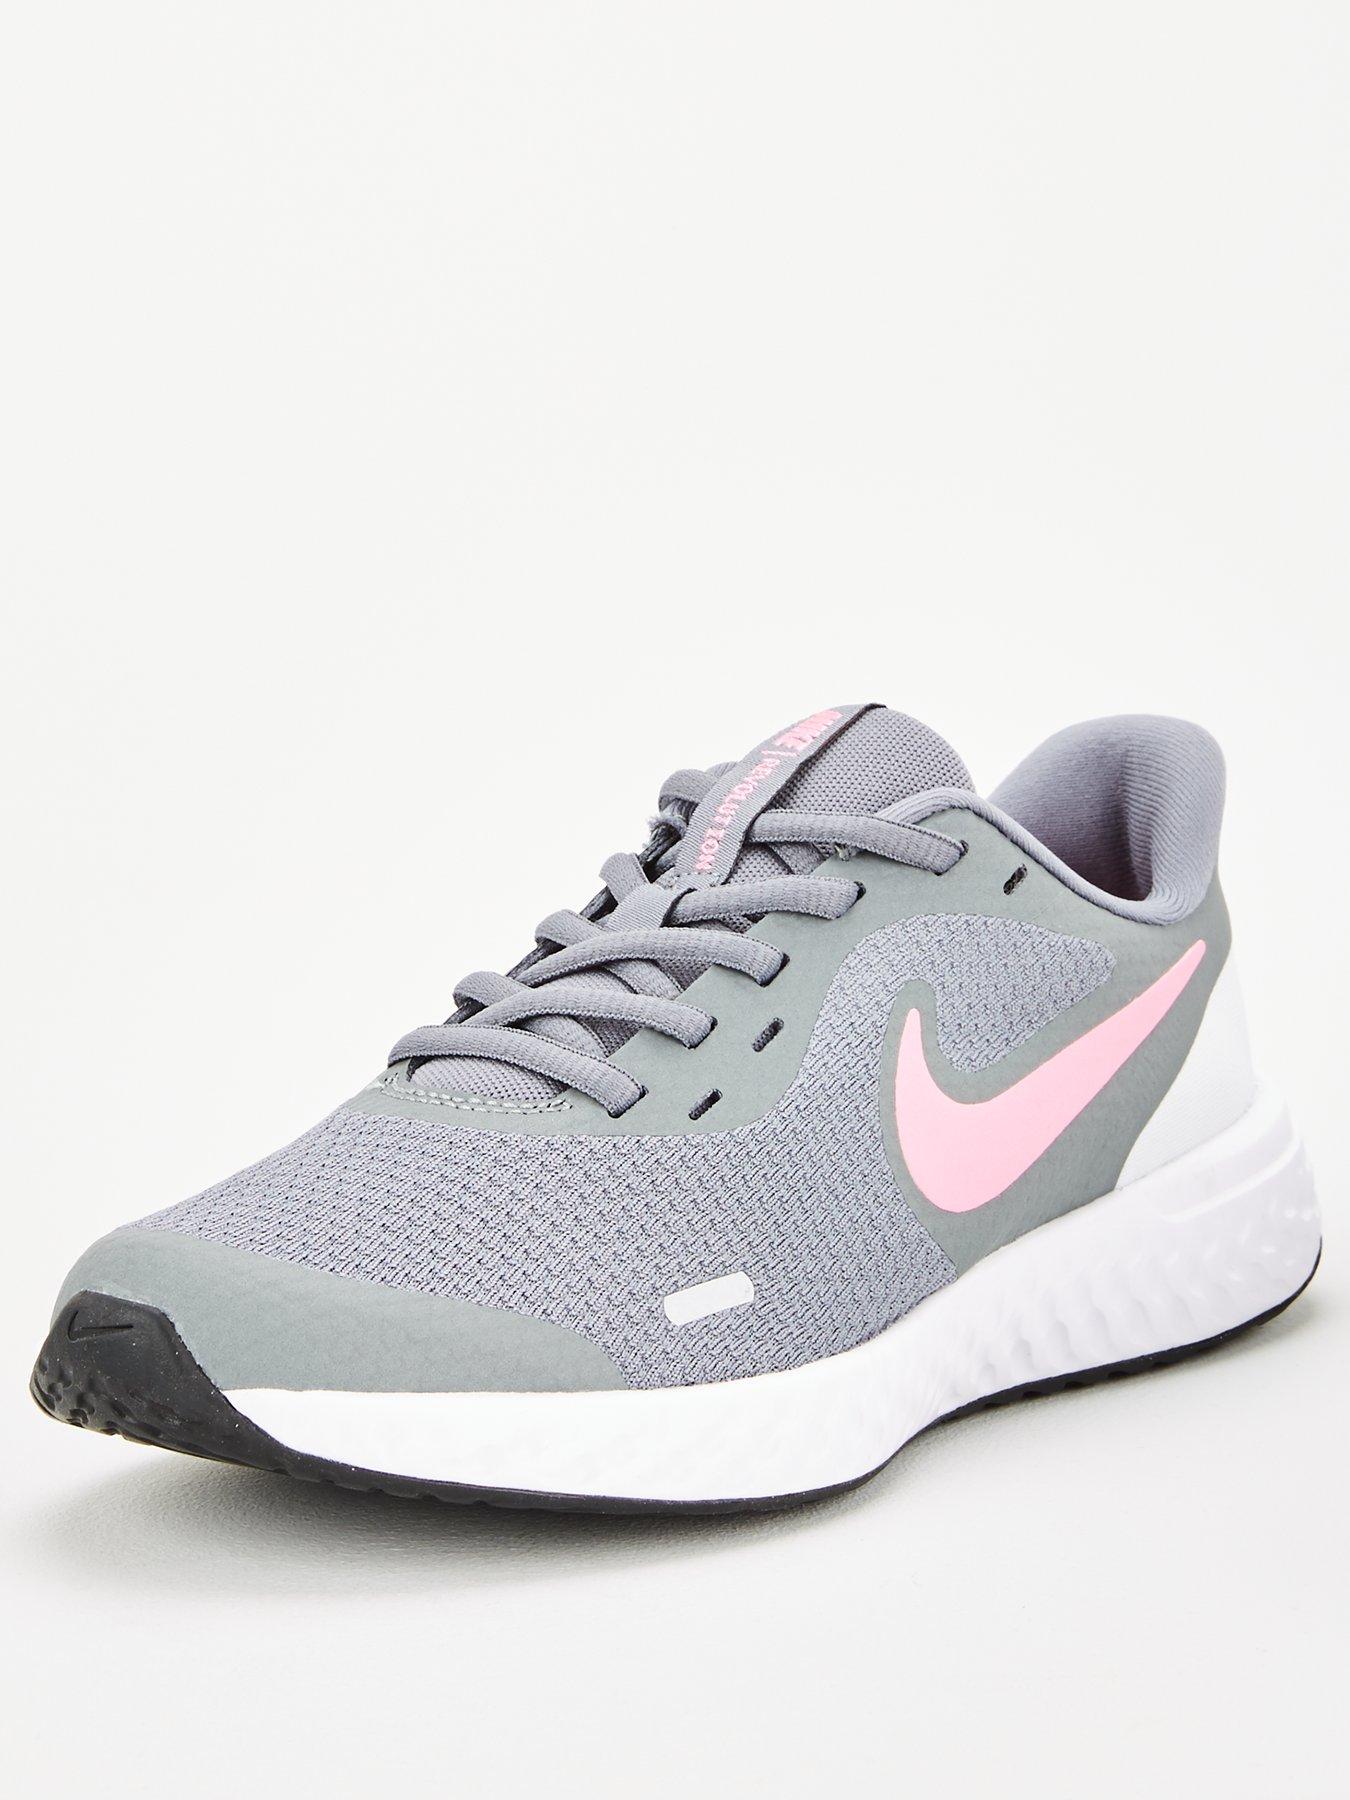 nike grey pink trainers